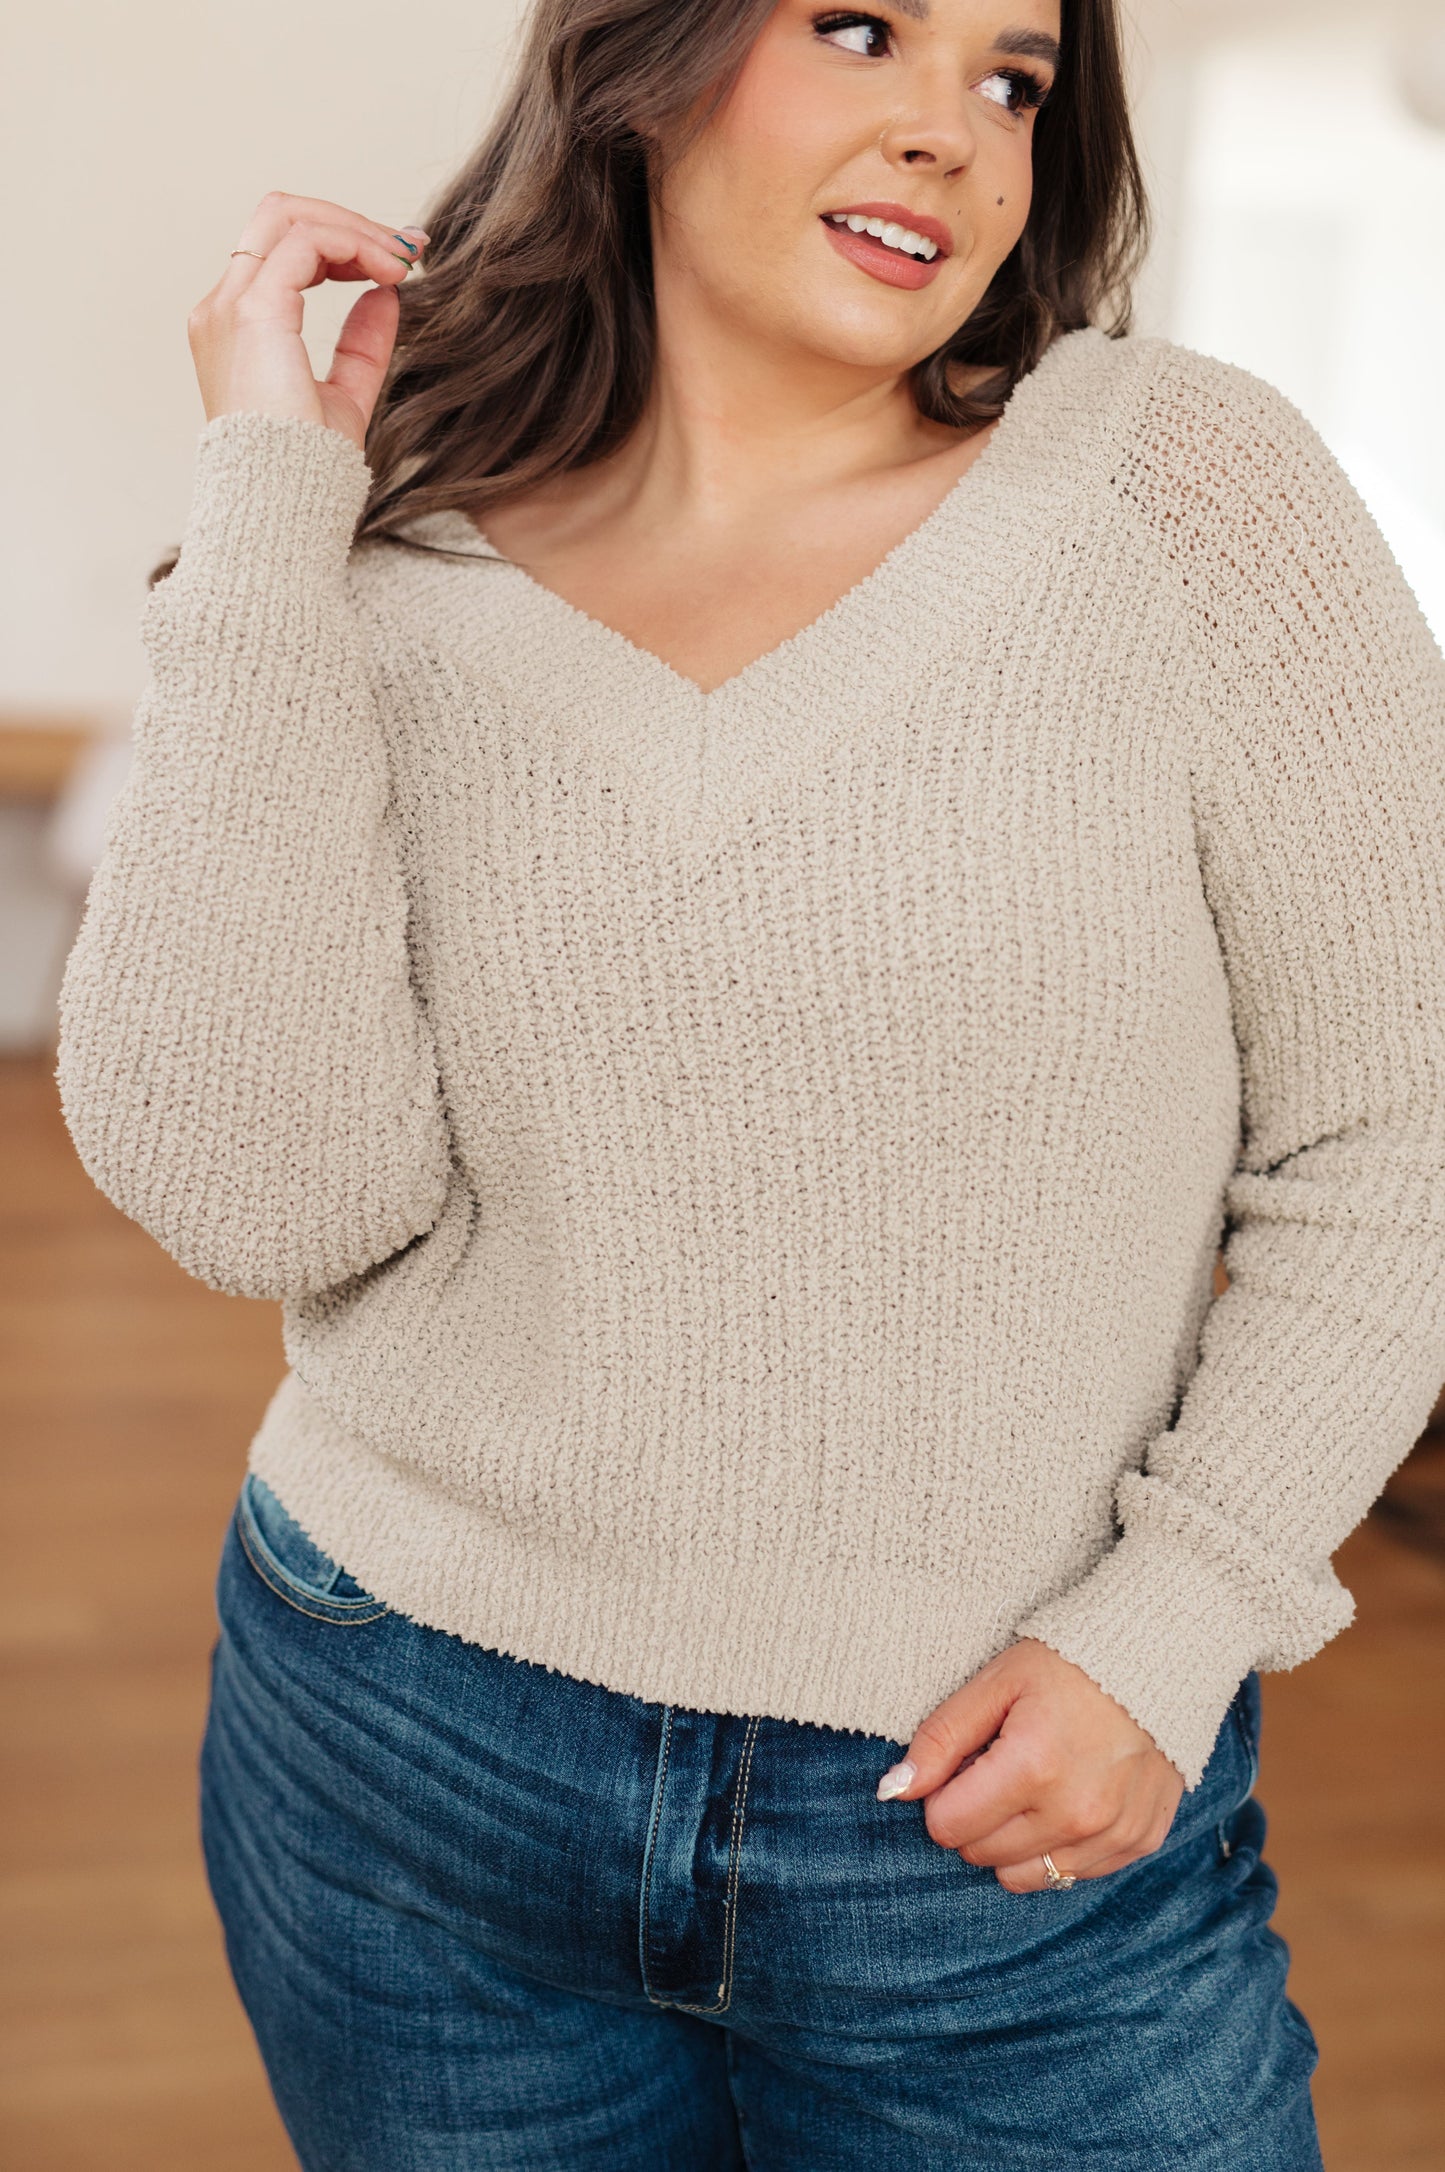 Stuck In The Moment V-Neck Sweater in Oatmeal